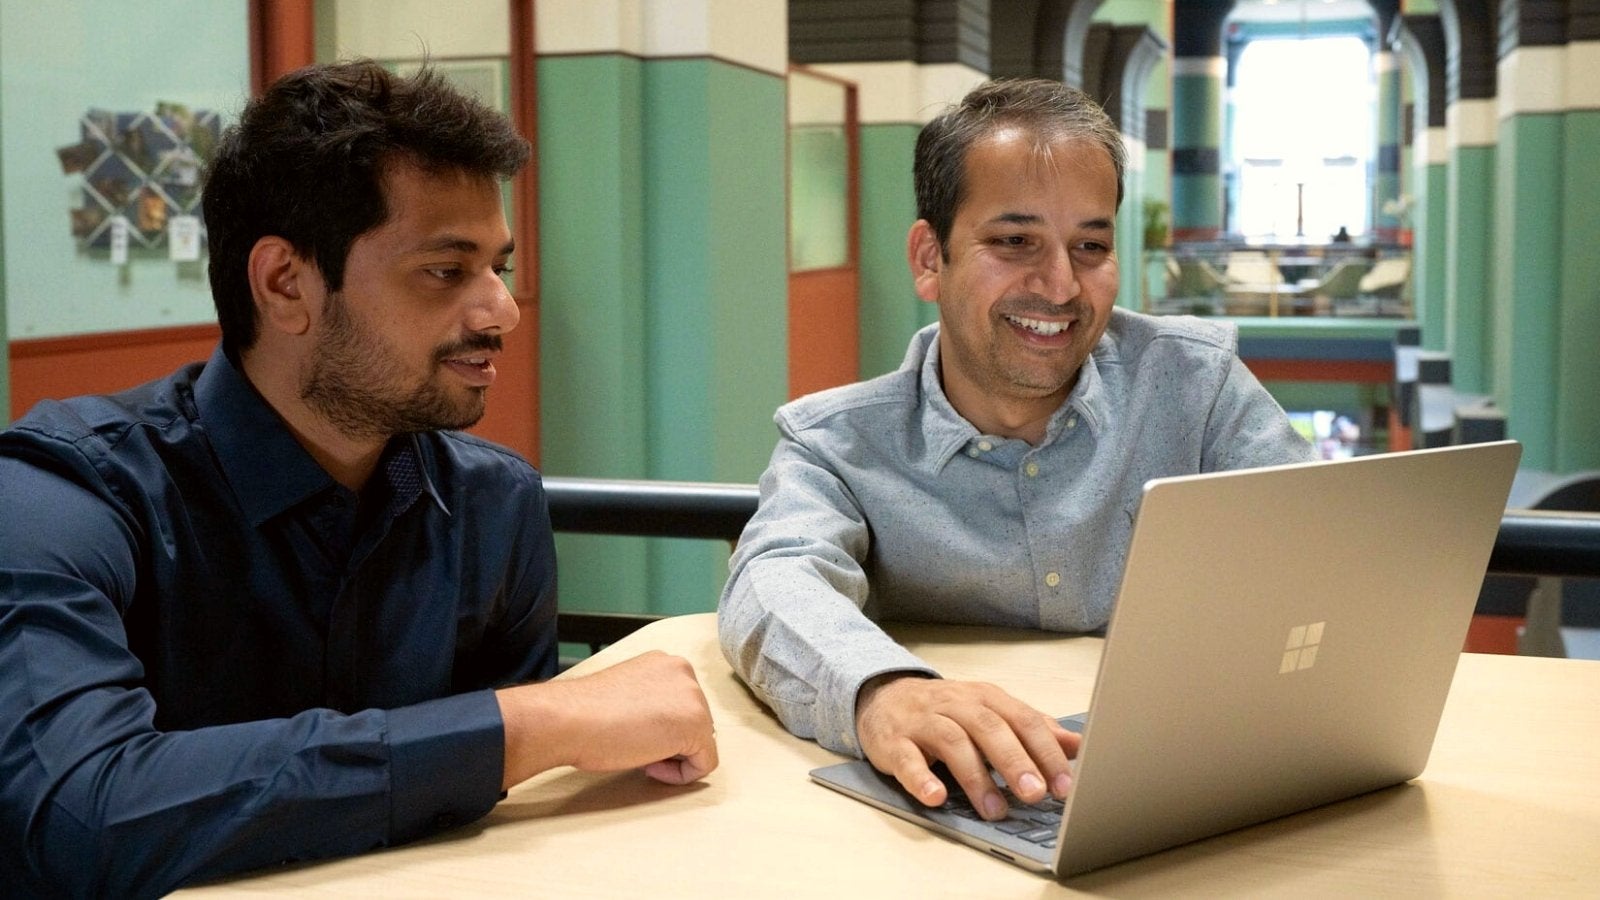 Aditya Desai and Anshumali Shrivastava sit in front of a laptop and talk inside Duncan Hall at Rice University